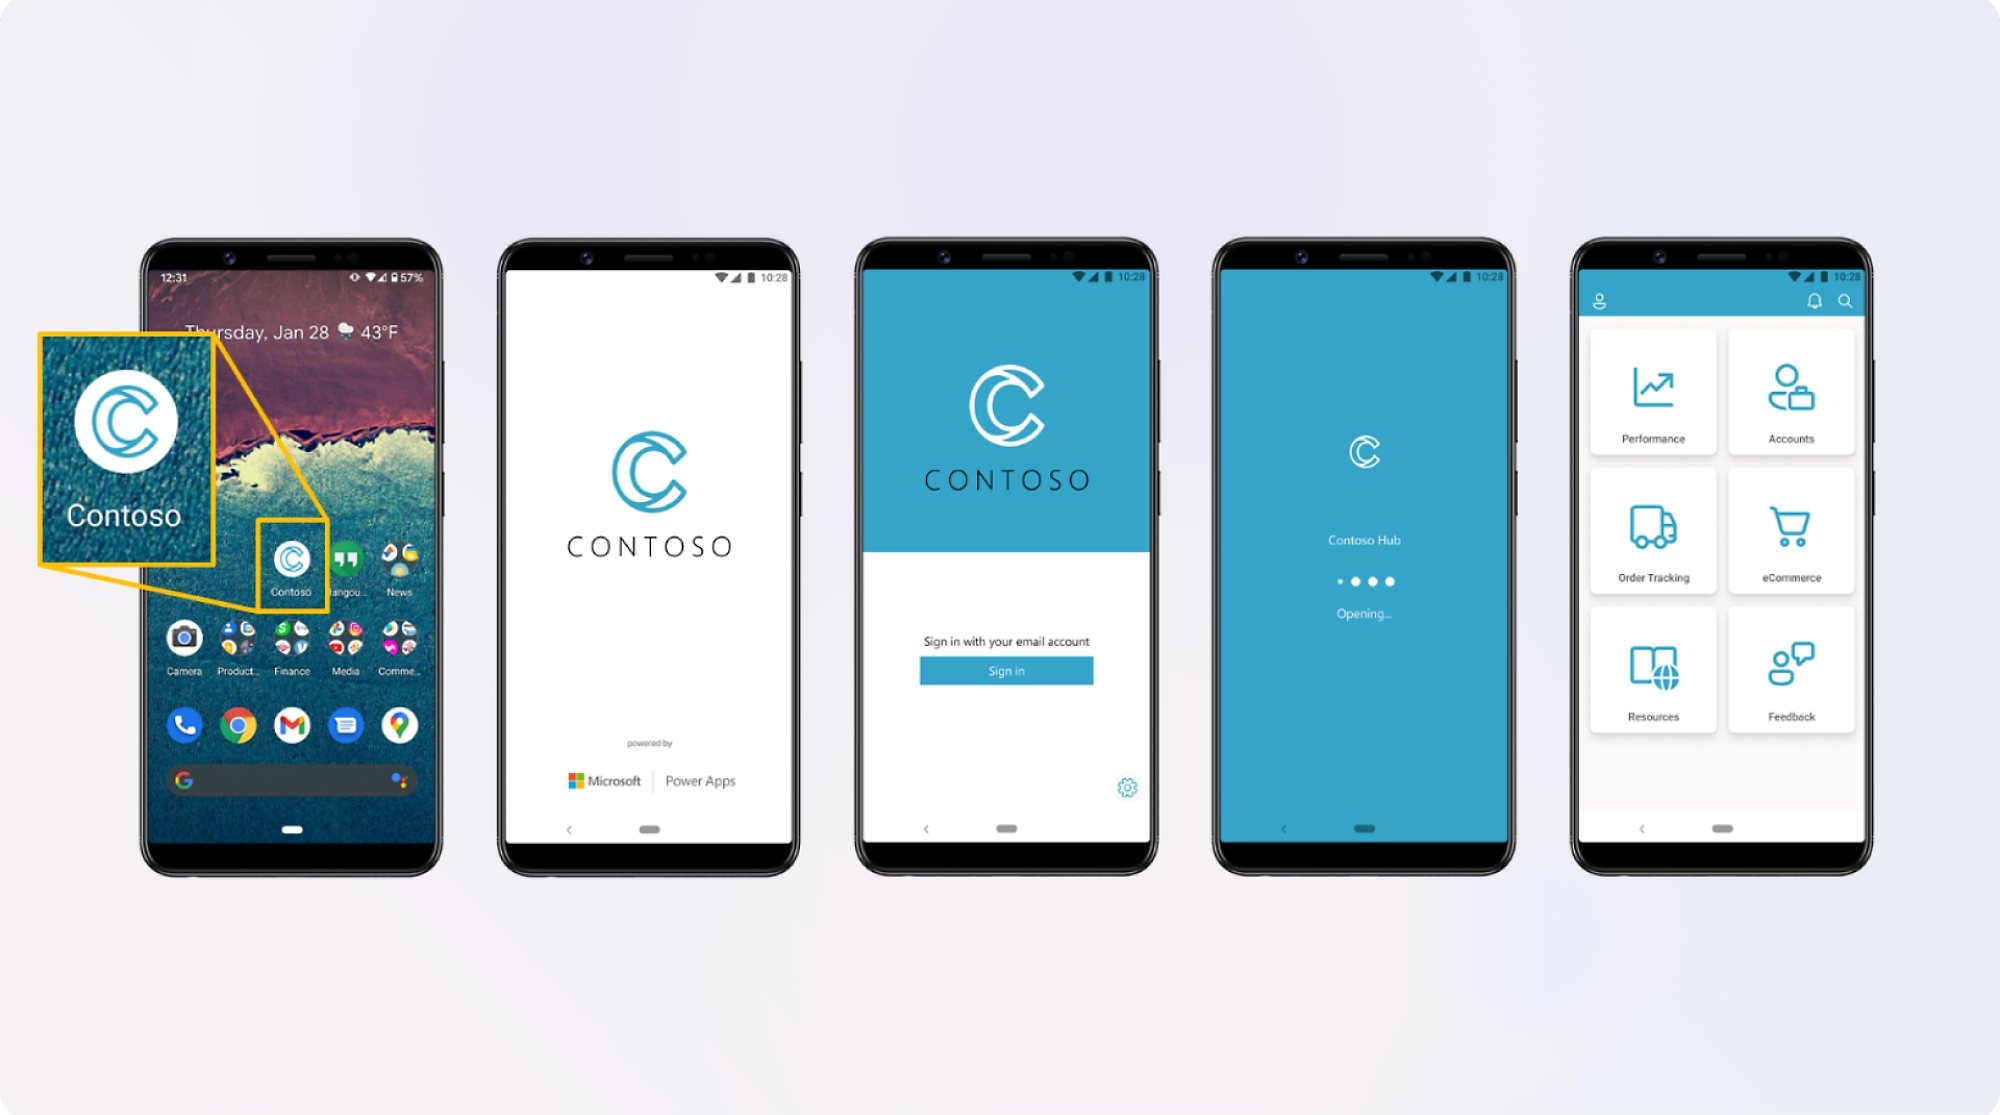 Five smartphones displaying various screens of the "contoso" app, showing login page, home screen